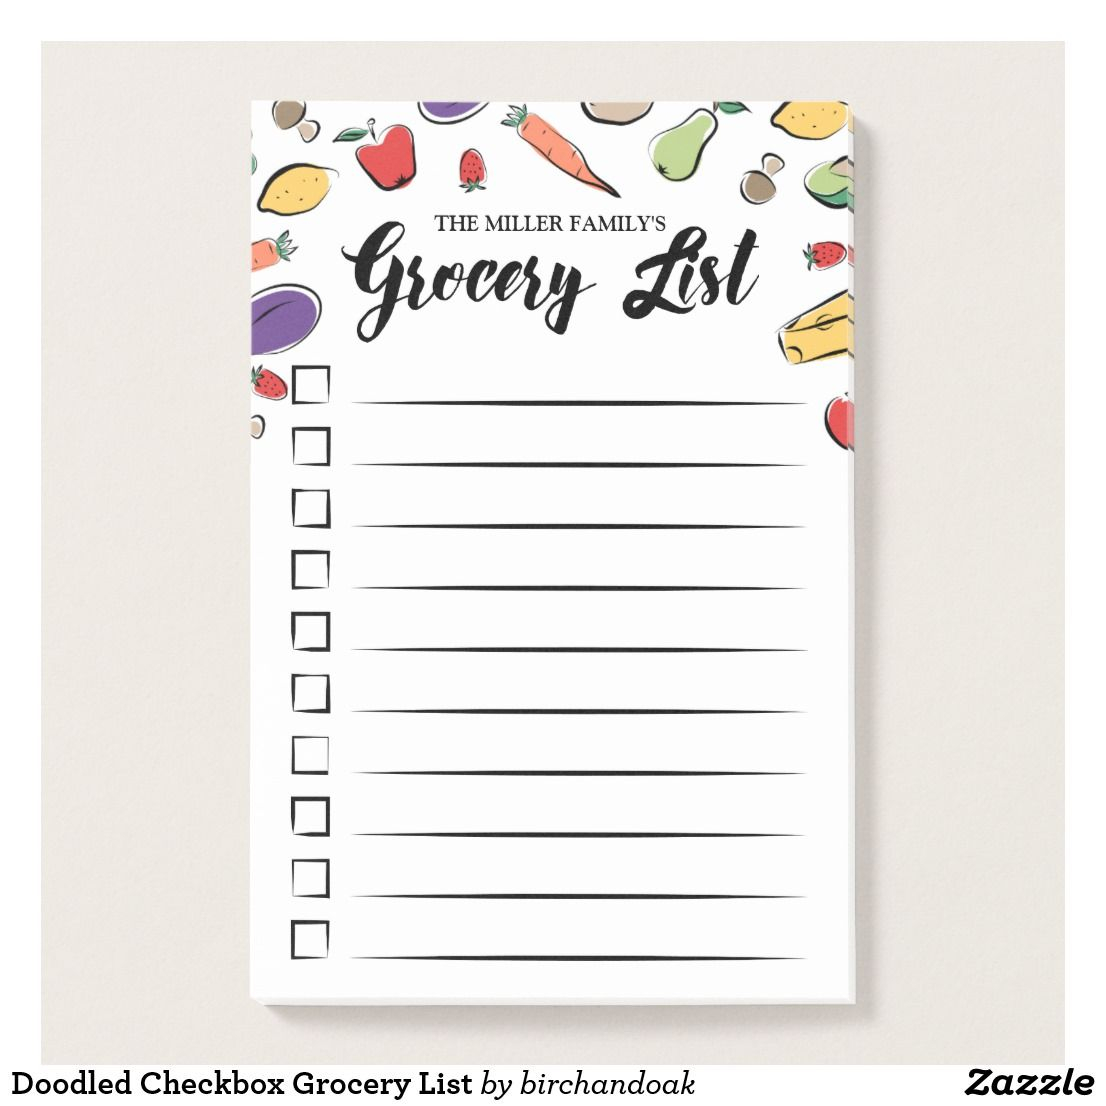 Doodled Checkbox Grocery List Post it Notes Zazzle ca 